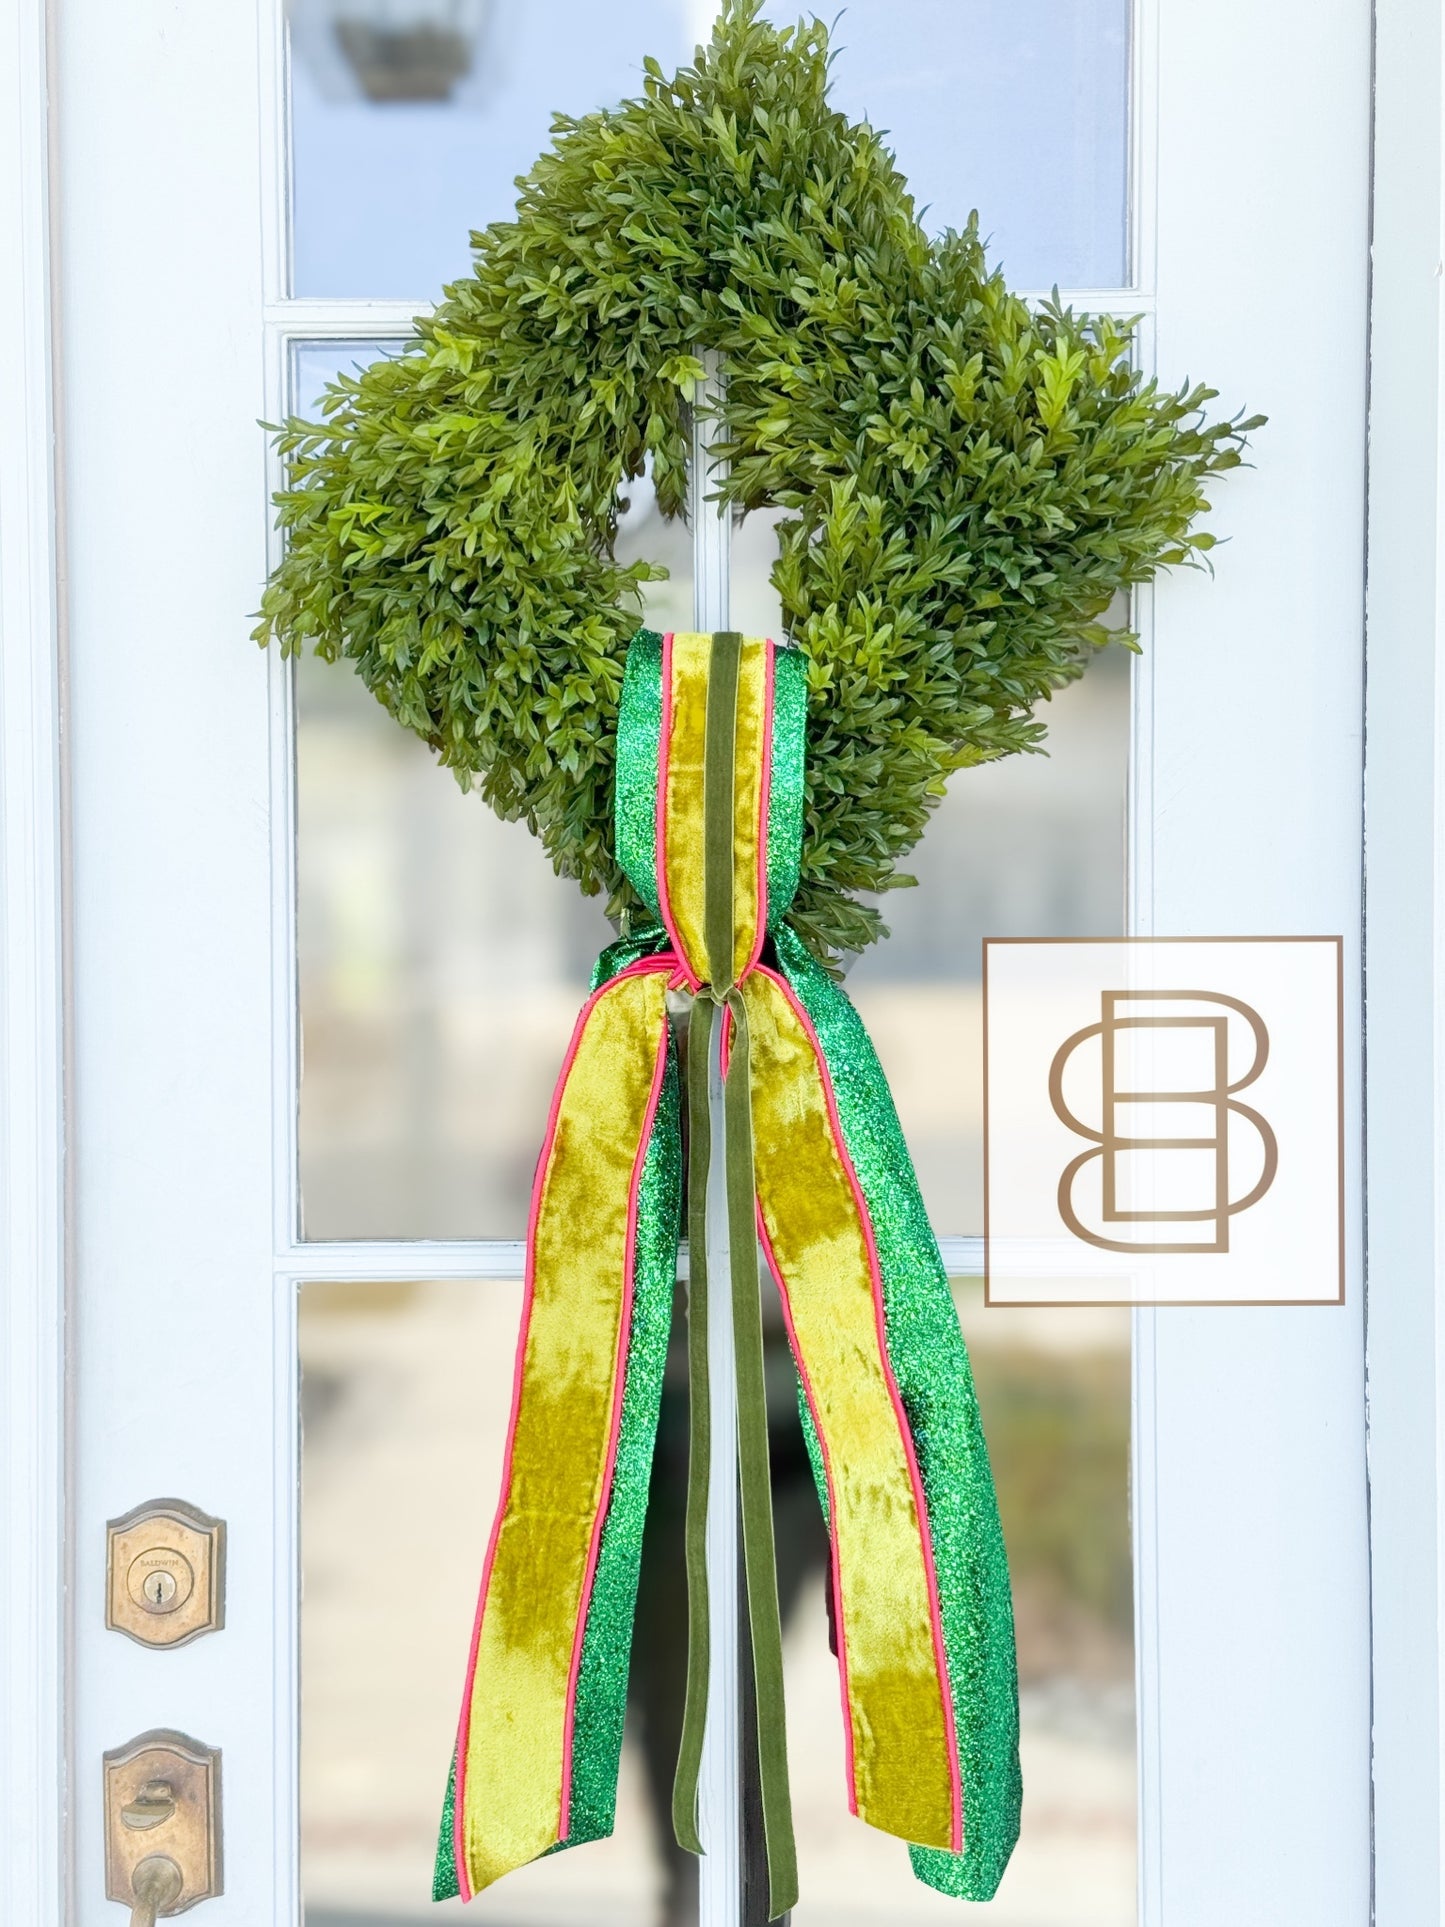 The Pinch Proof Wreath And Sash